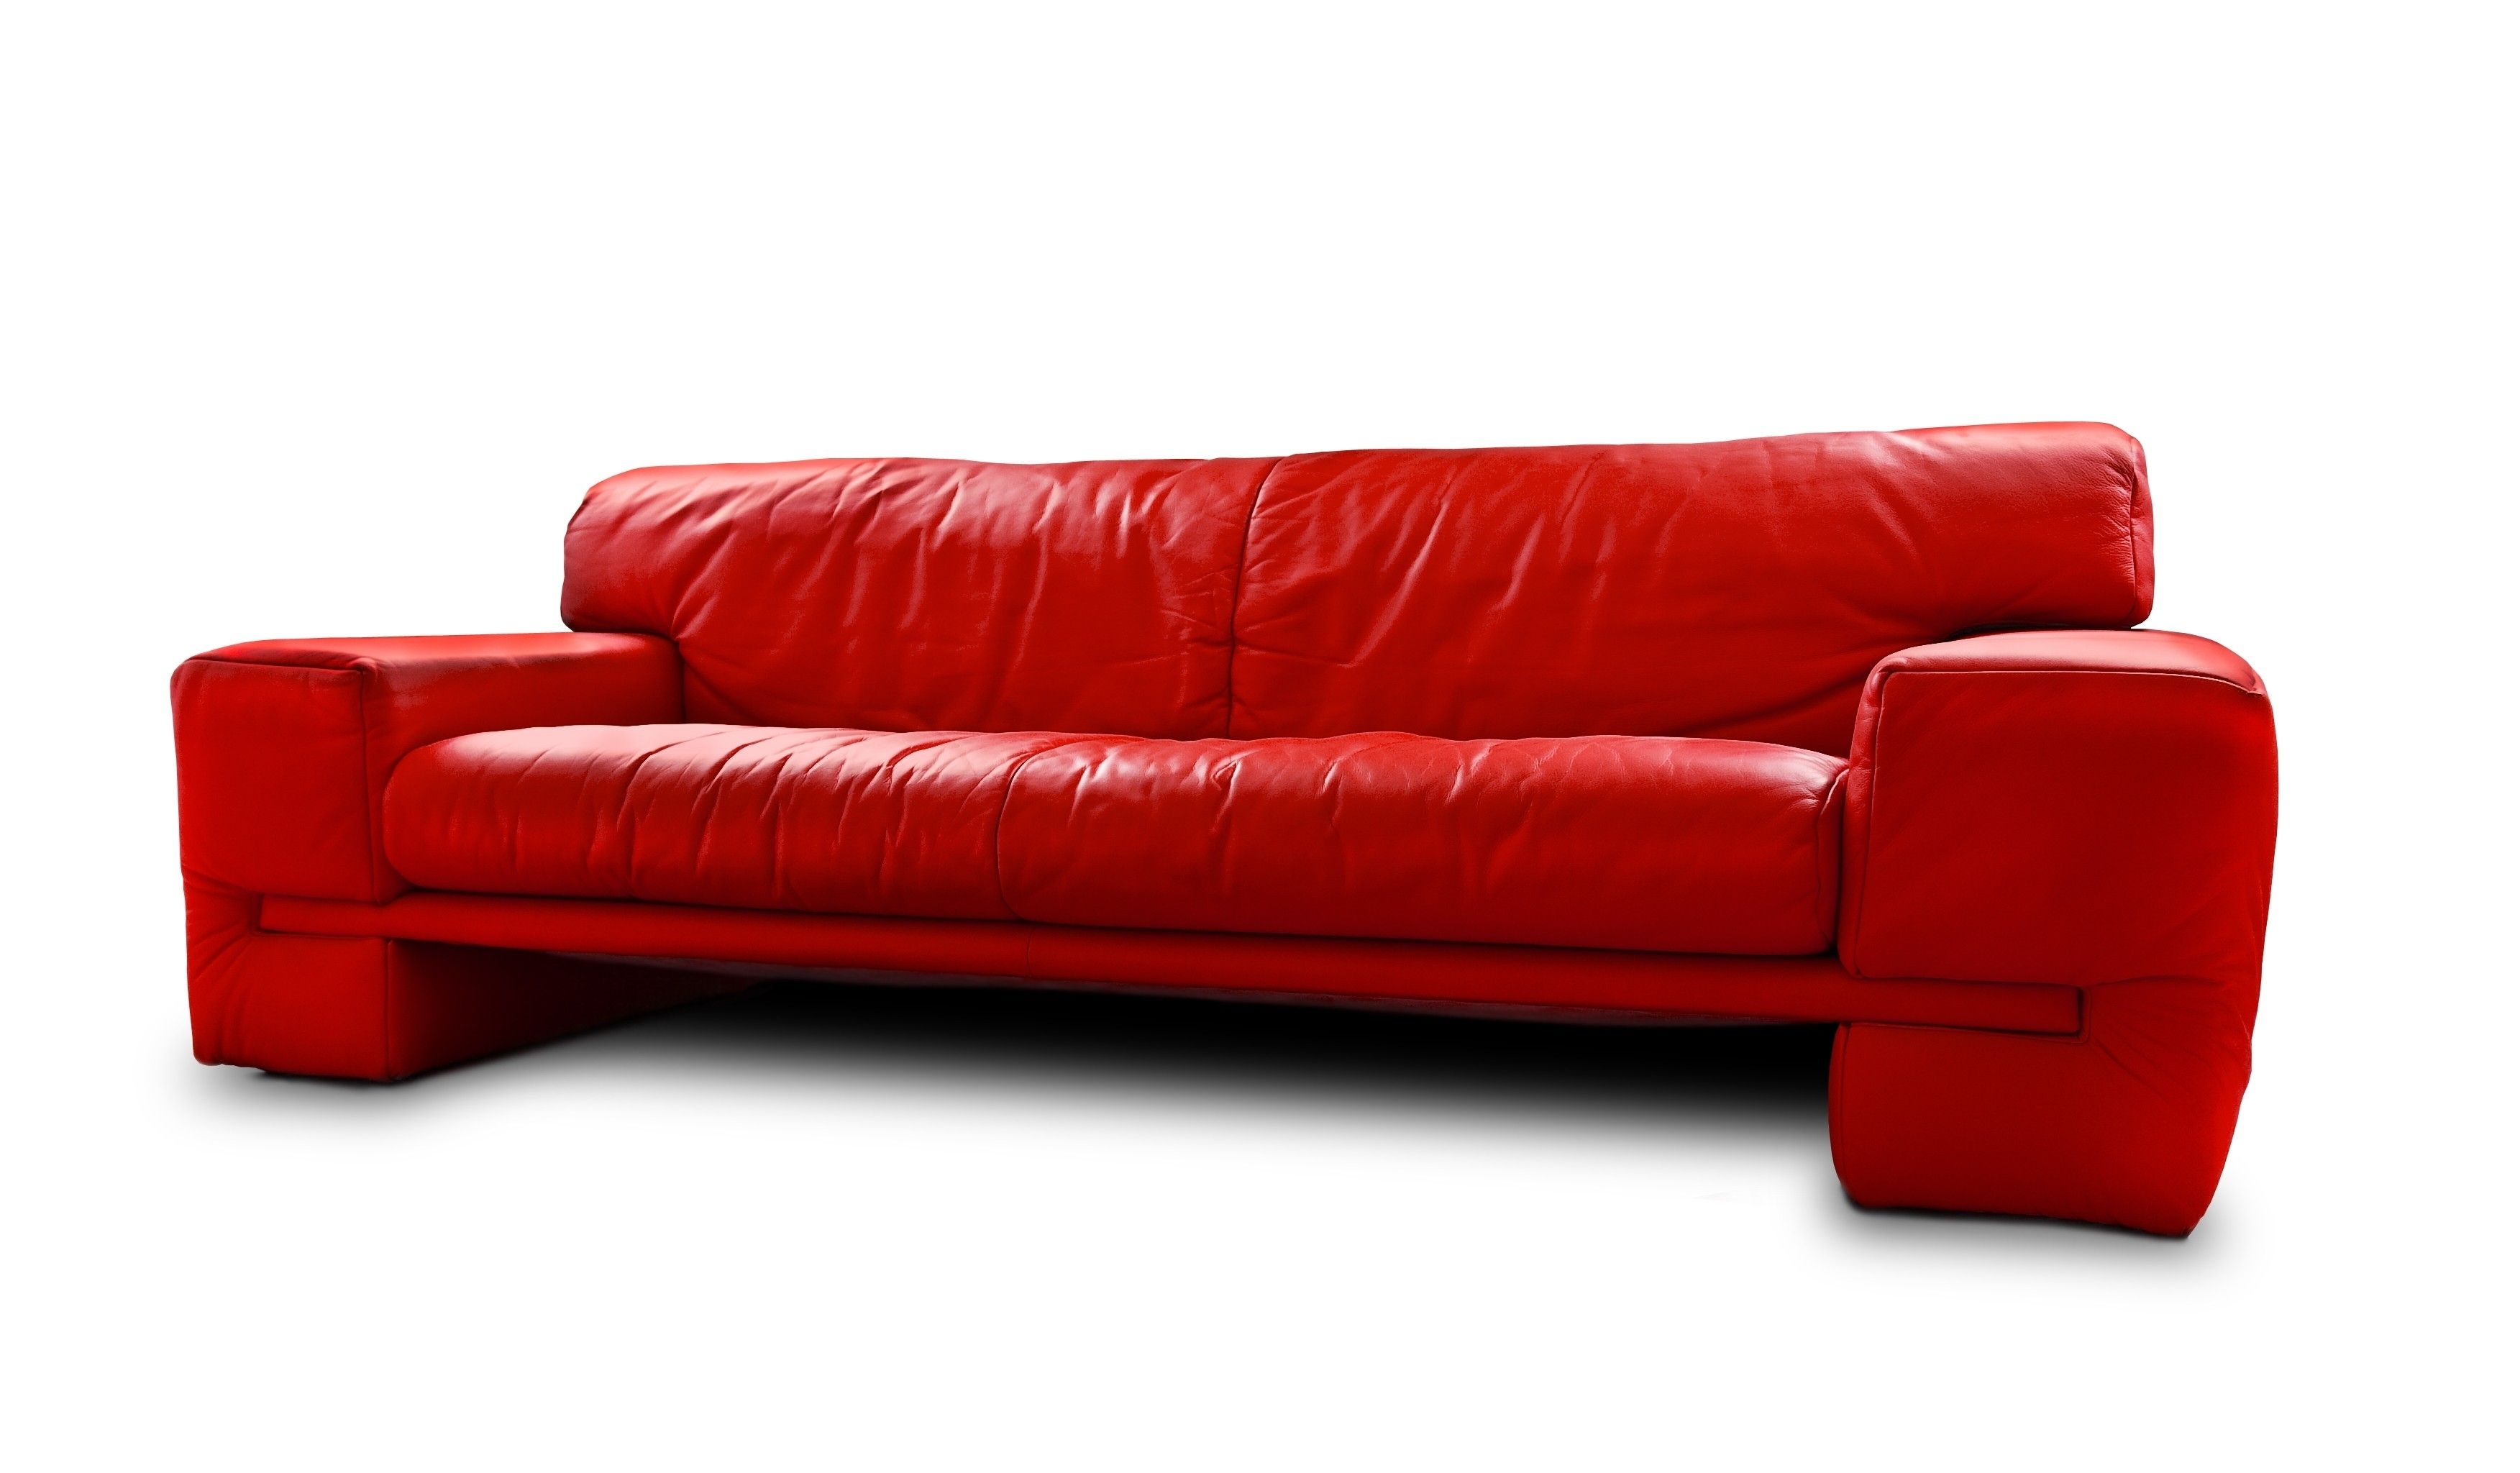 Captivating Red Leather Sleeper Sofa Cool Home Furniture Ideas With Throughout Red Sleeper Sofas (Photo 7 of 10)